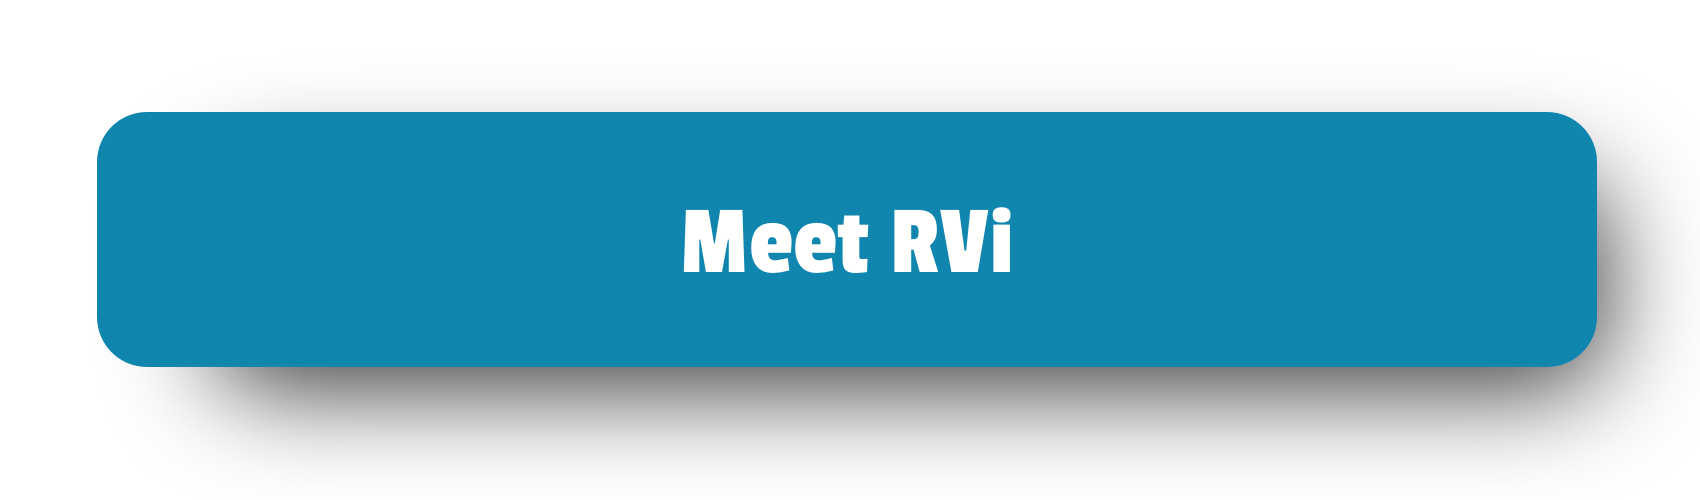 RVi - Flat Towing and RV Accessories 